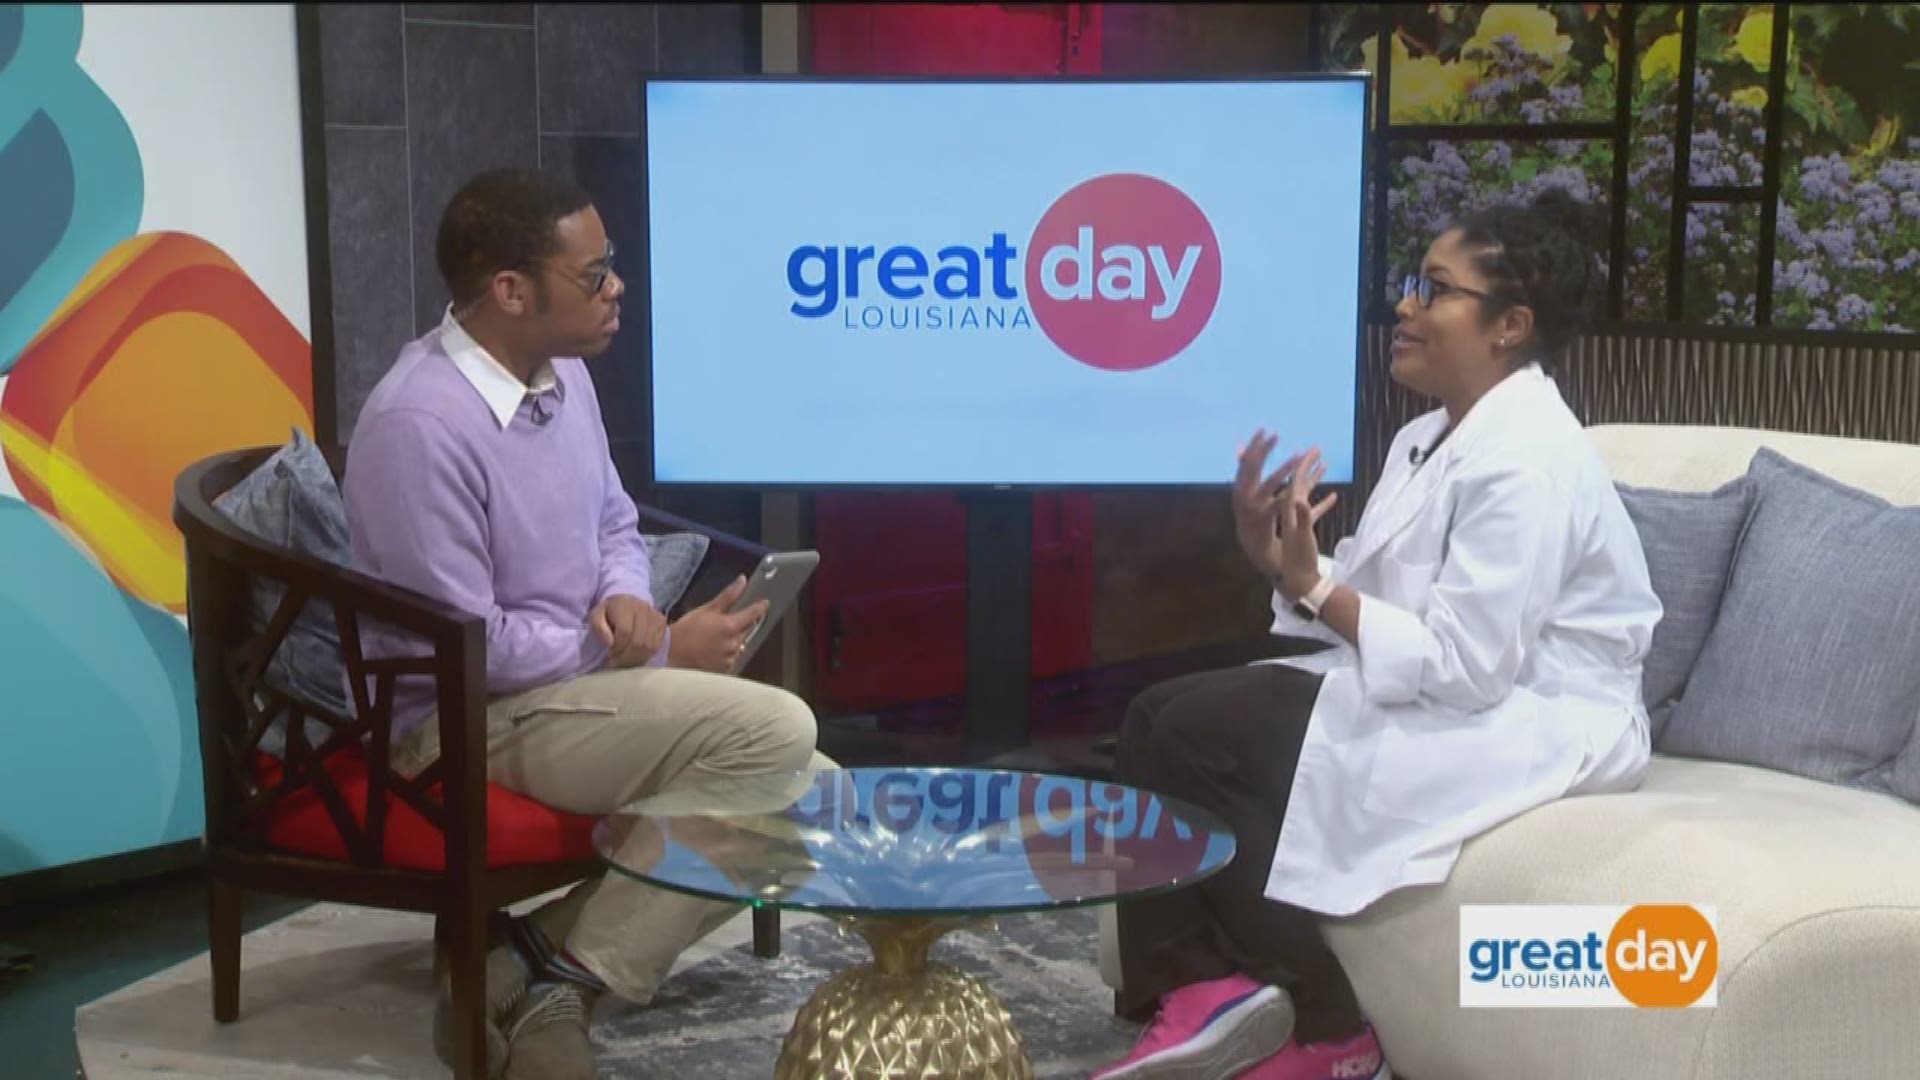 Family medicine physician, Dr. Whitney Hardy, discussed the do's and don'ts of intermittent fasting.